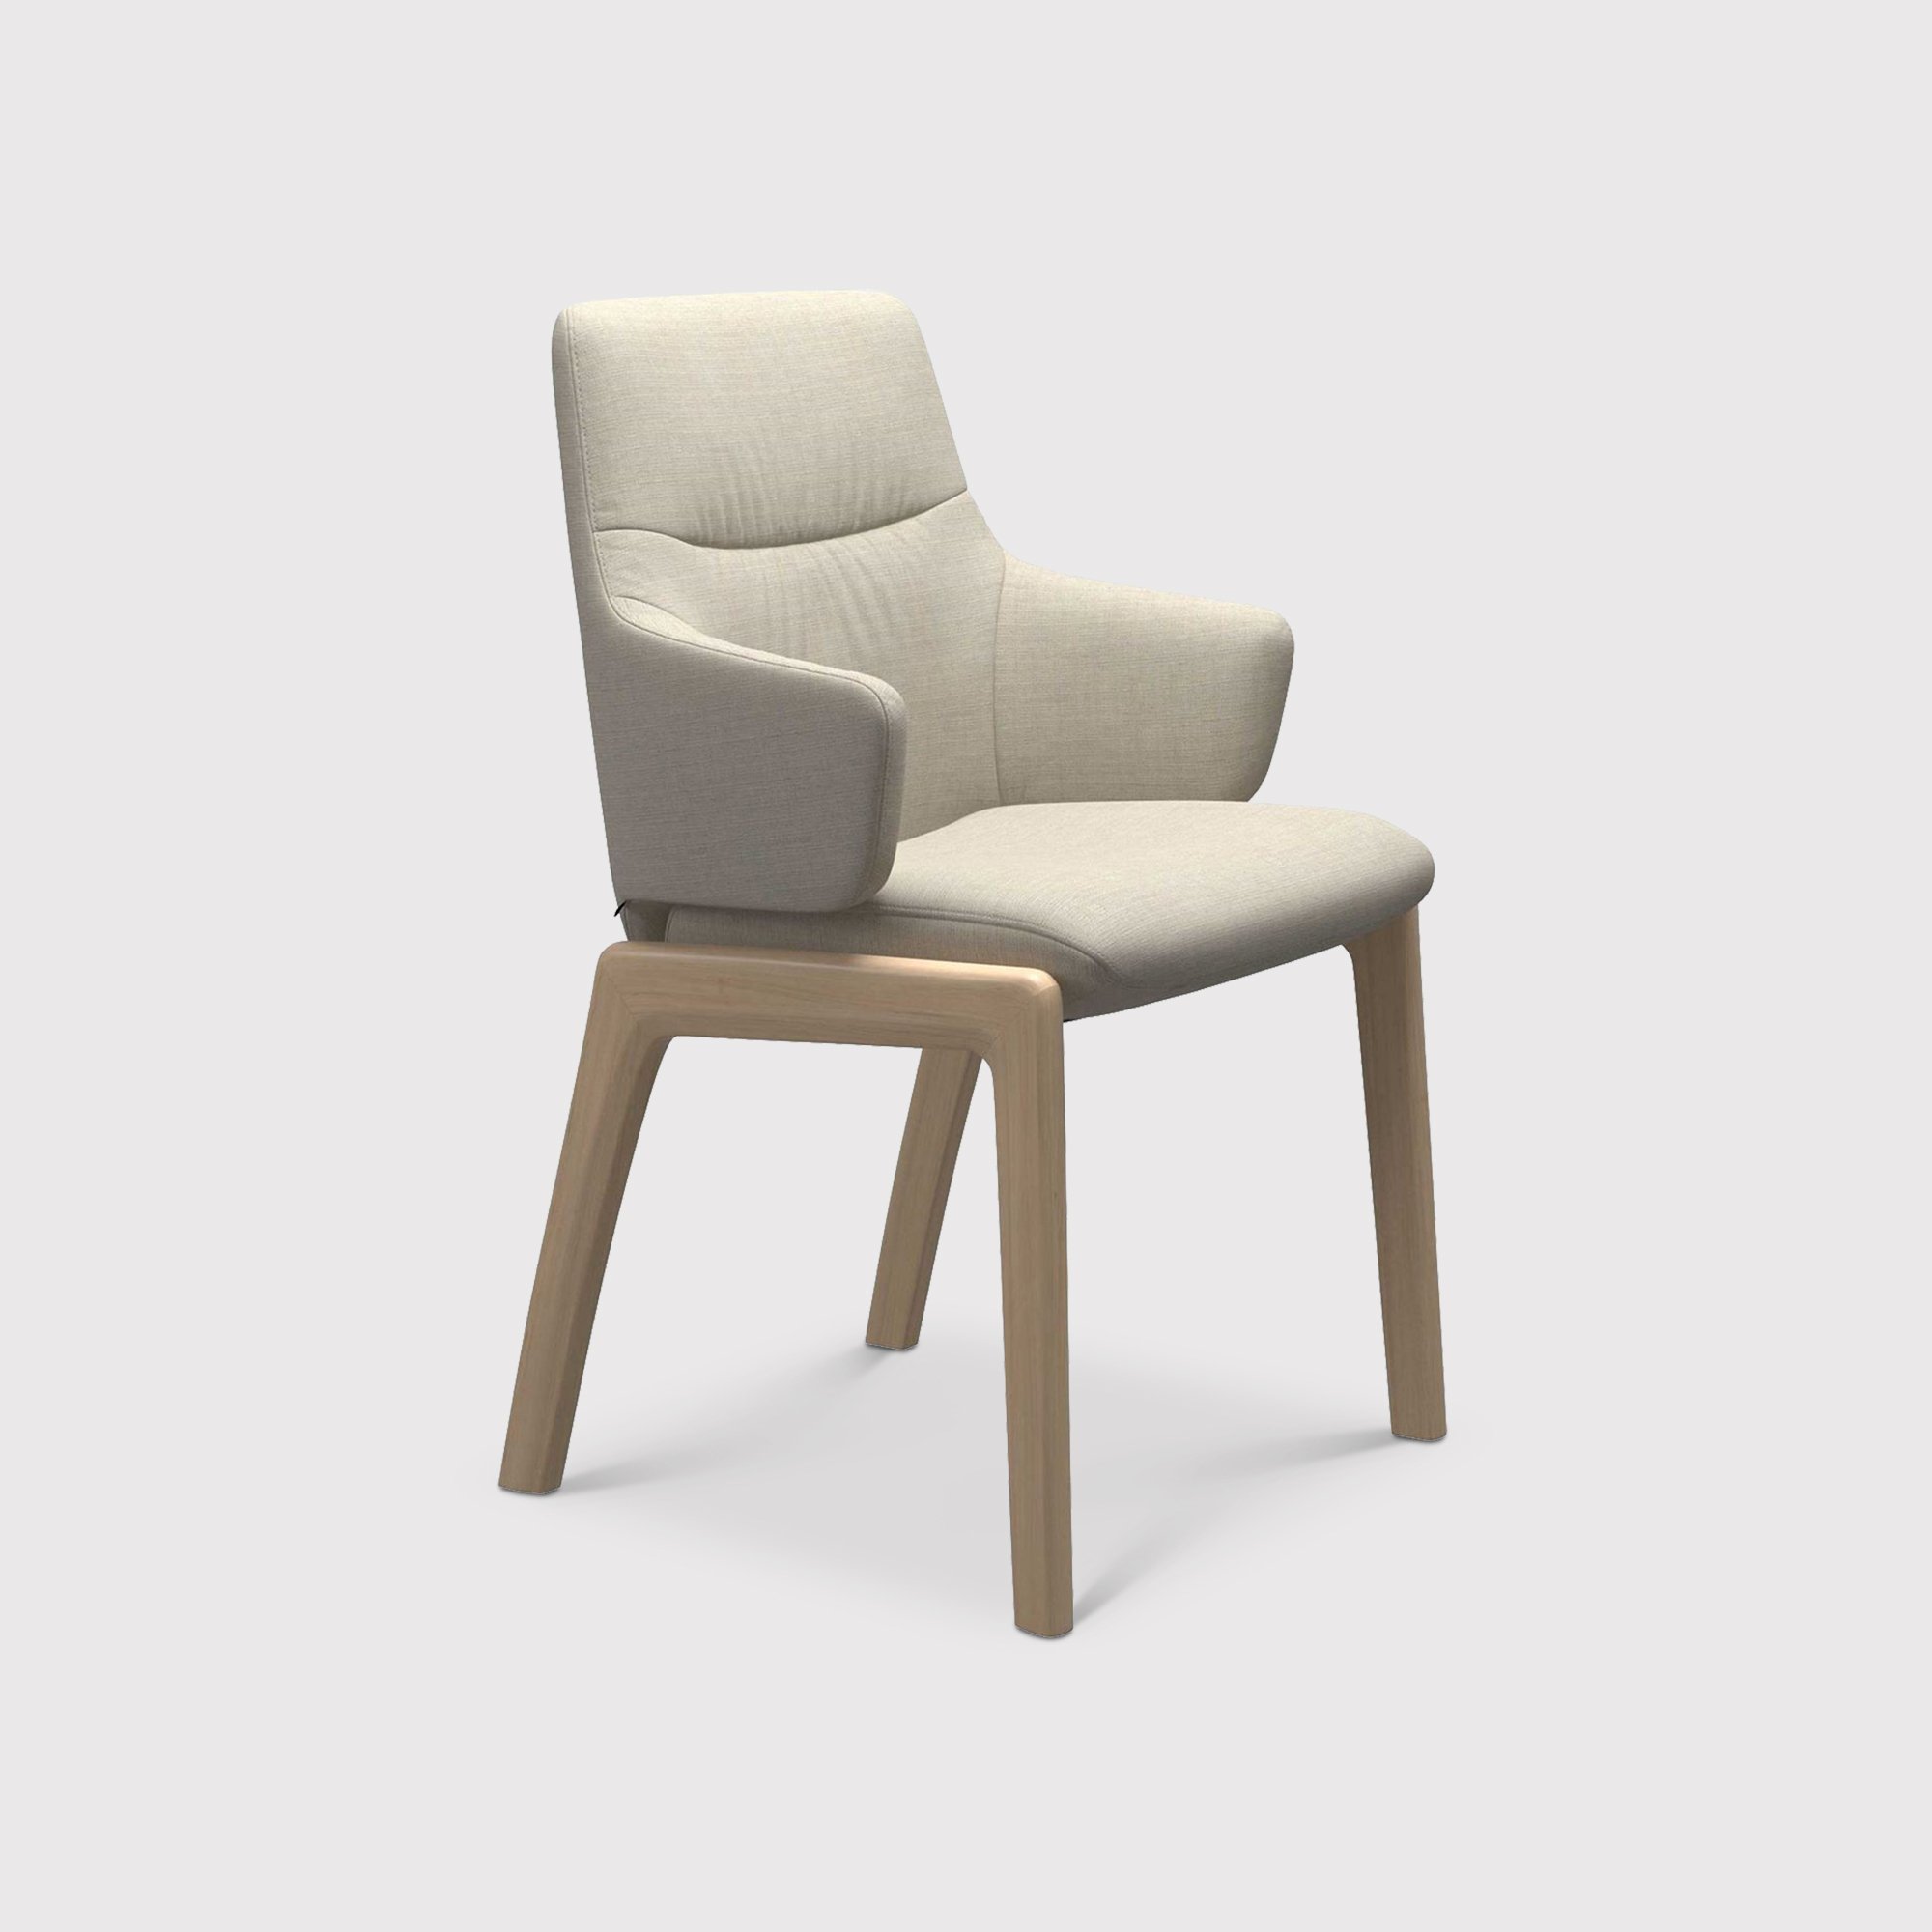 Stressless Mint Dining Chair Low Back D100 Arms Quickship, Neutral | Barker & Stonehouse